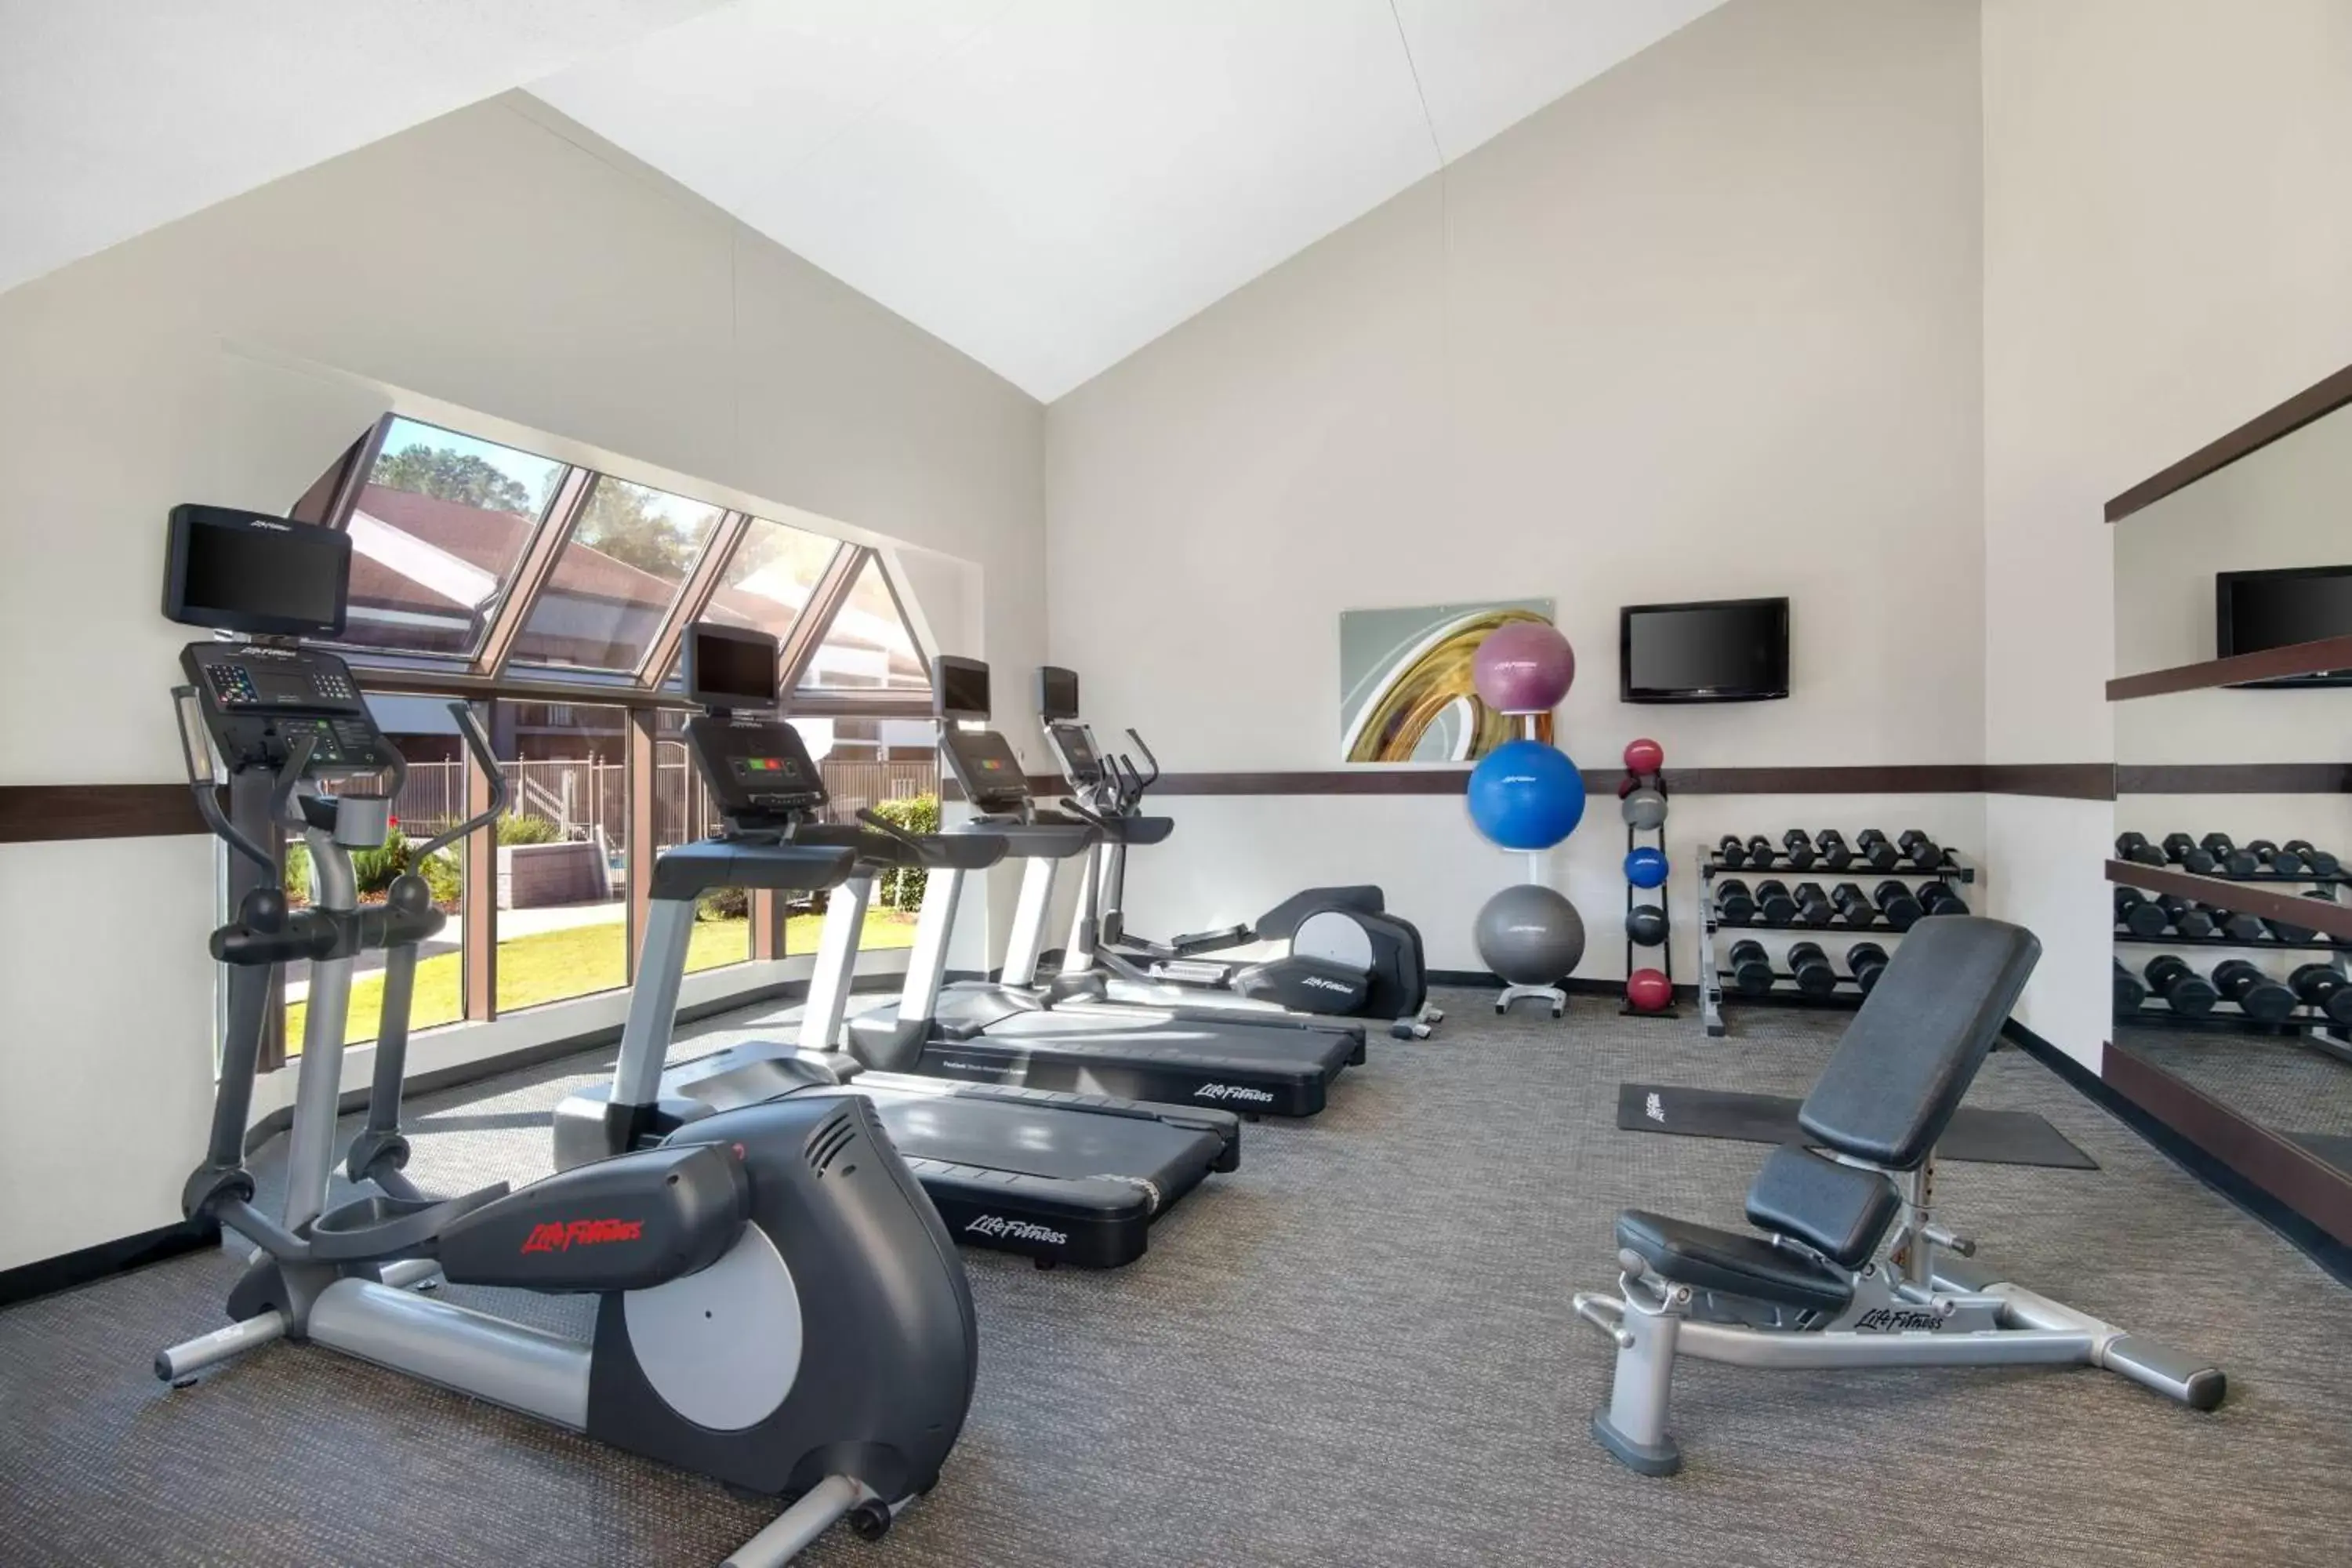 Fitness centre/facilities, Fitness Center/Facilities in Courtyard by Marriott Birmingham Homewood